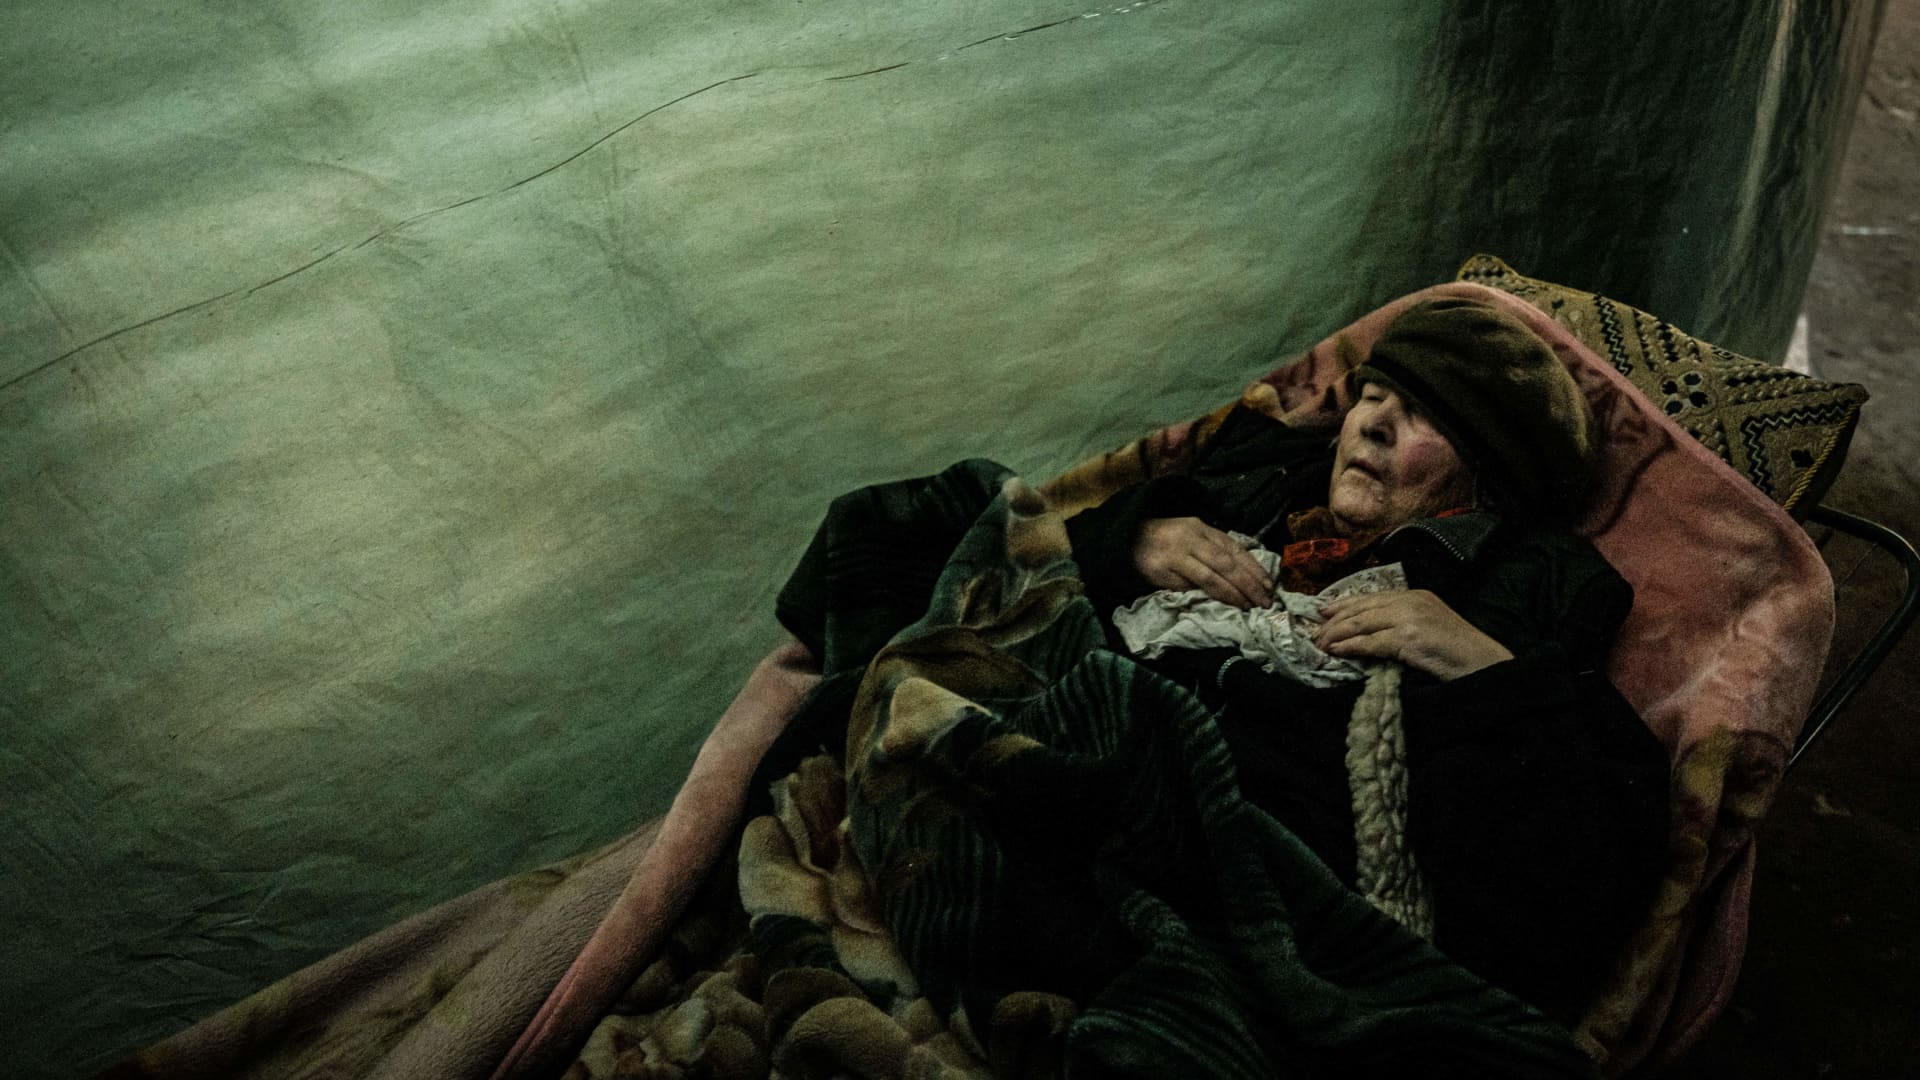 TOPSHOT - An internally displaced 92-year-old woman lays downs as she waits for Ukraine Red Cross to evacuate her in a bunker at a factory in Severodonetsk, eastern Ukraine, on April 22, 2022 amid the Russian invasion of Ukraine.